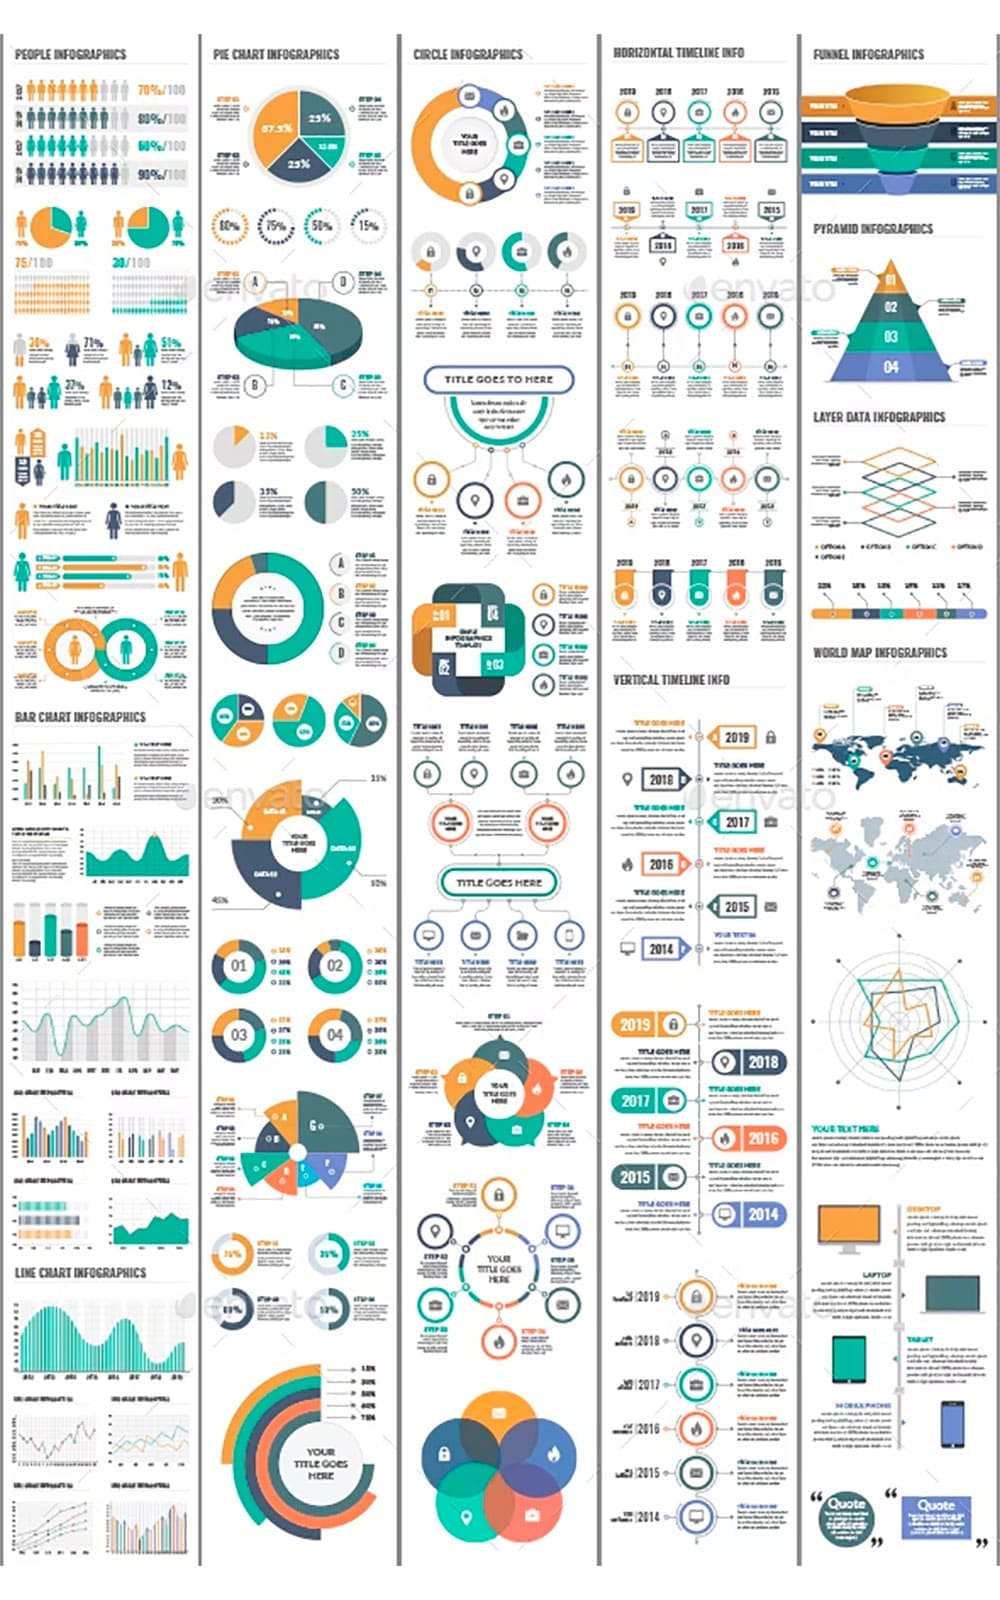 Data visualization elements, picture for pinterest.